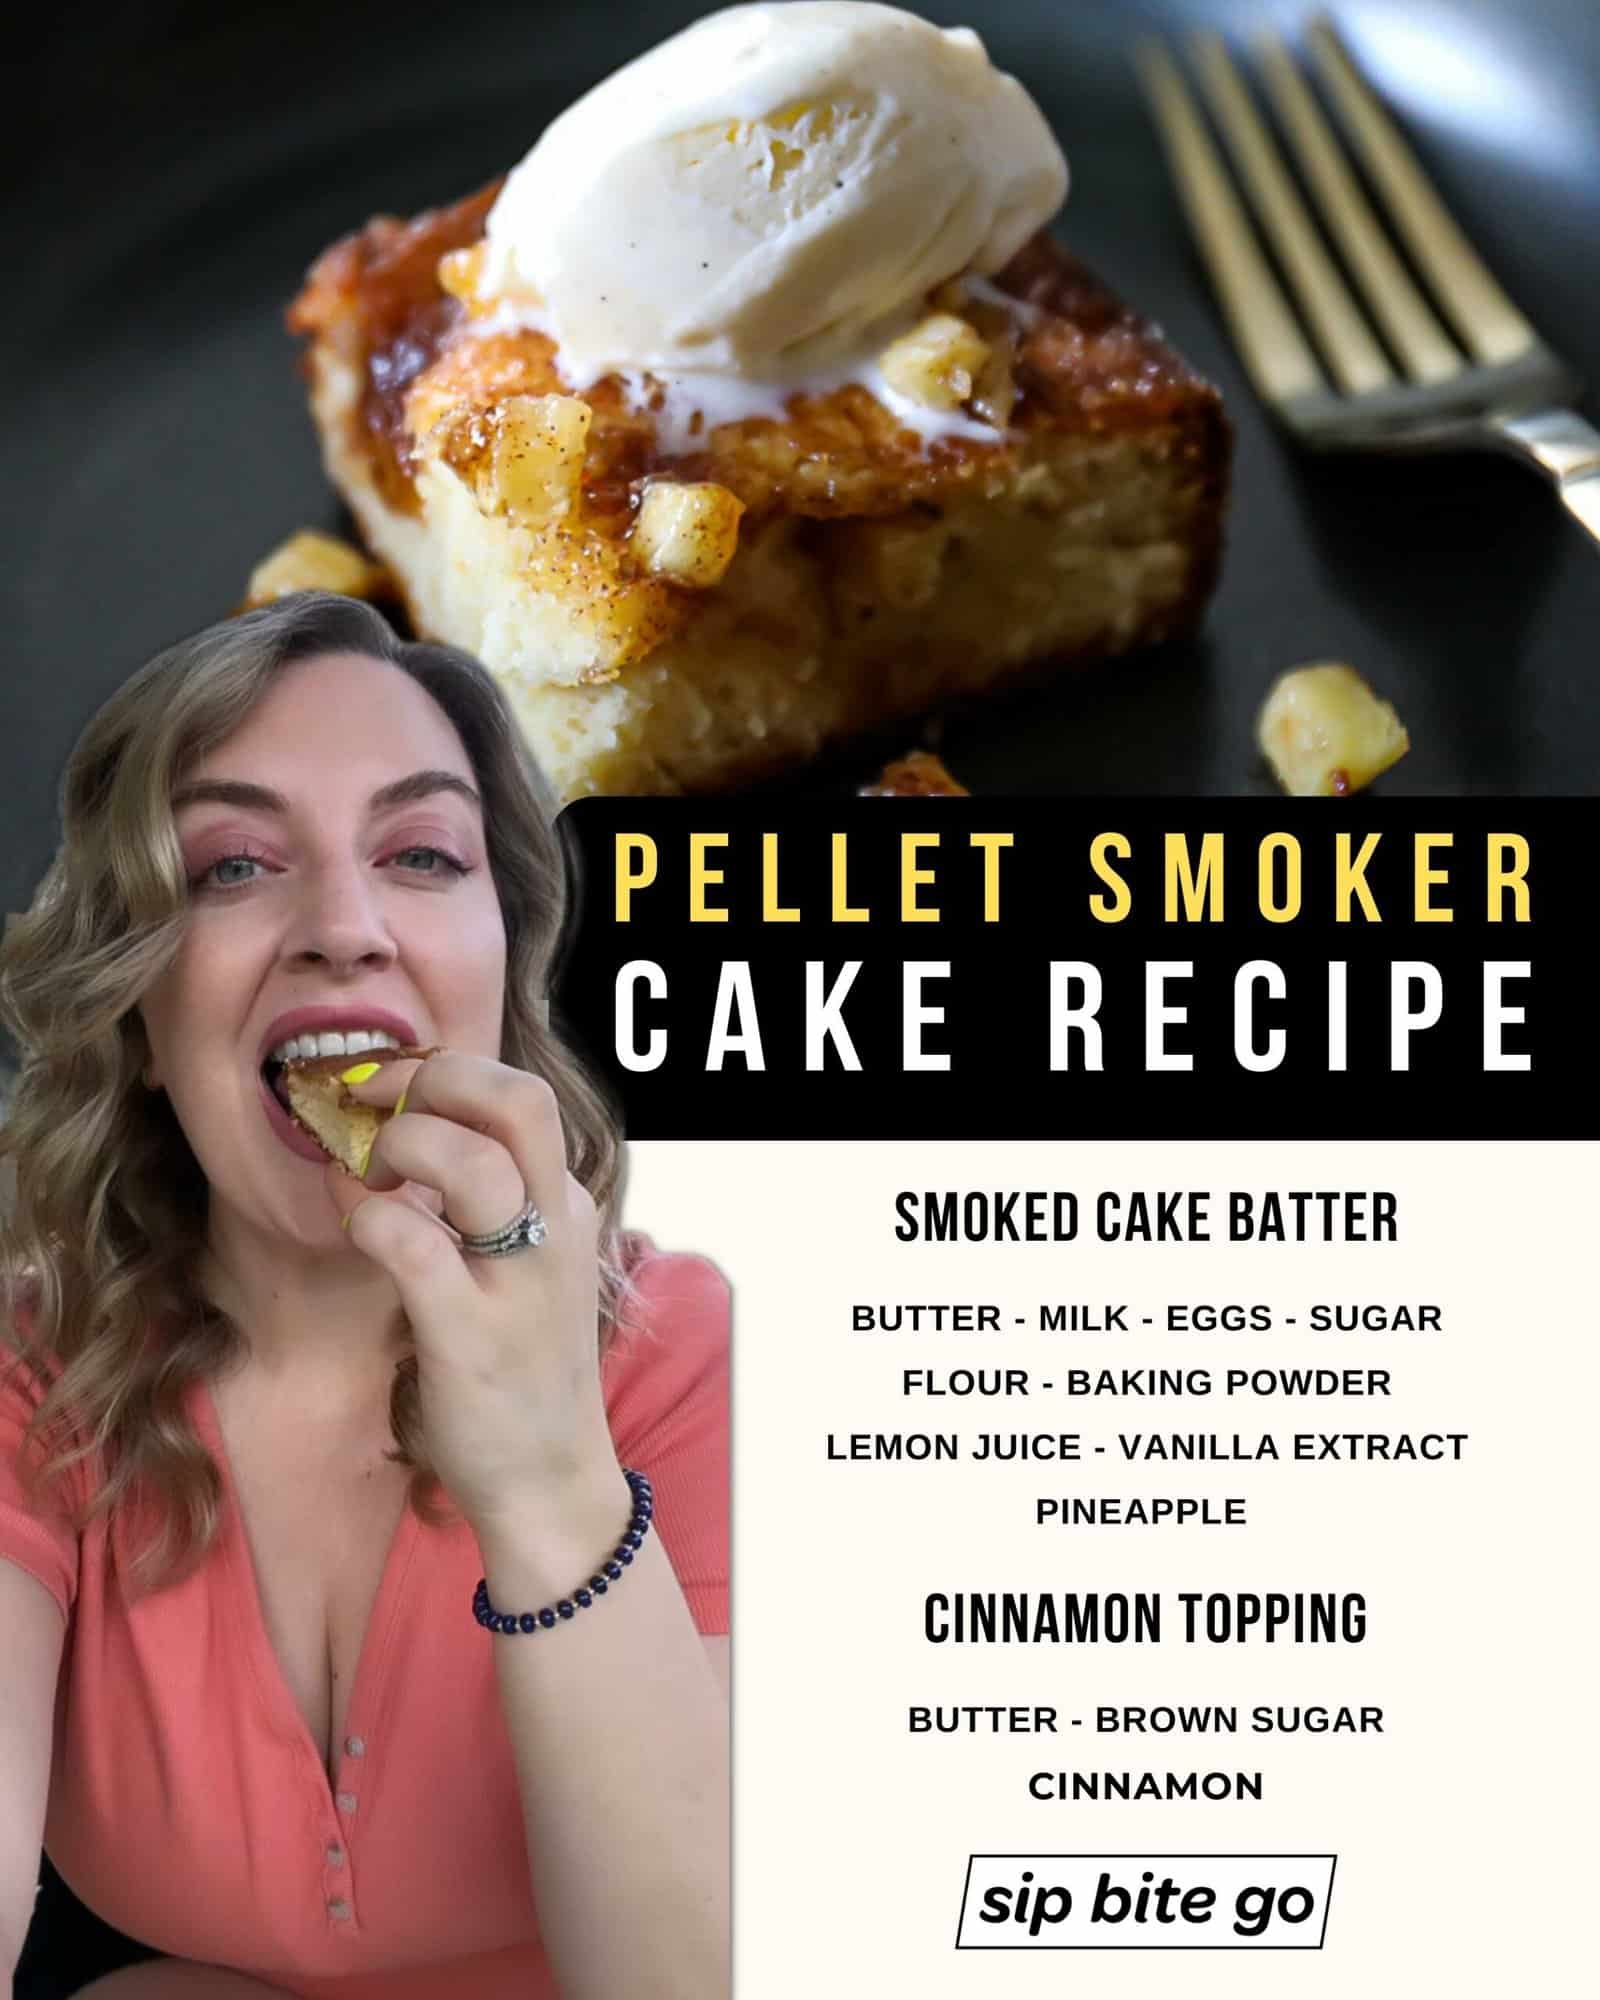 Infographic demonstrating recipe ingredients for making smoked cake with pineapple and cinnamon topping